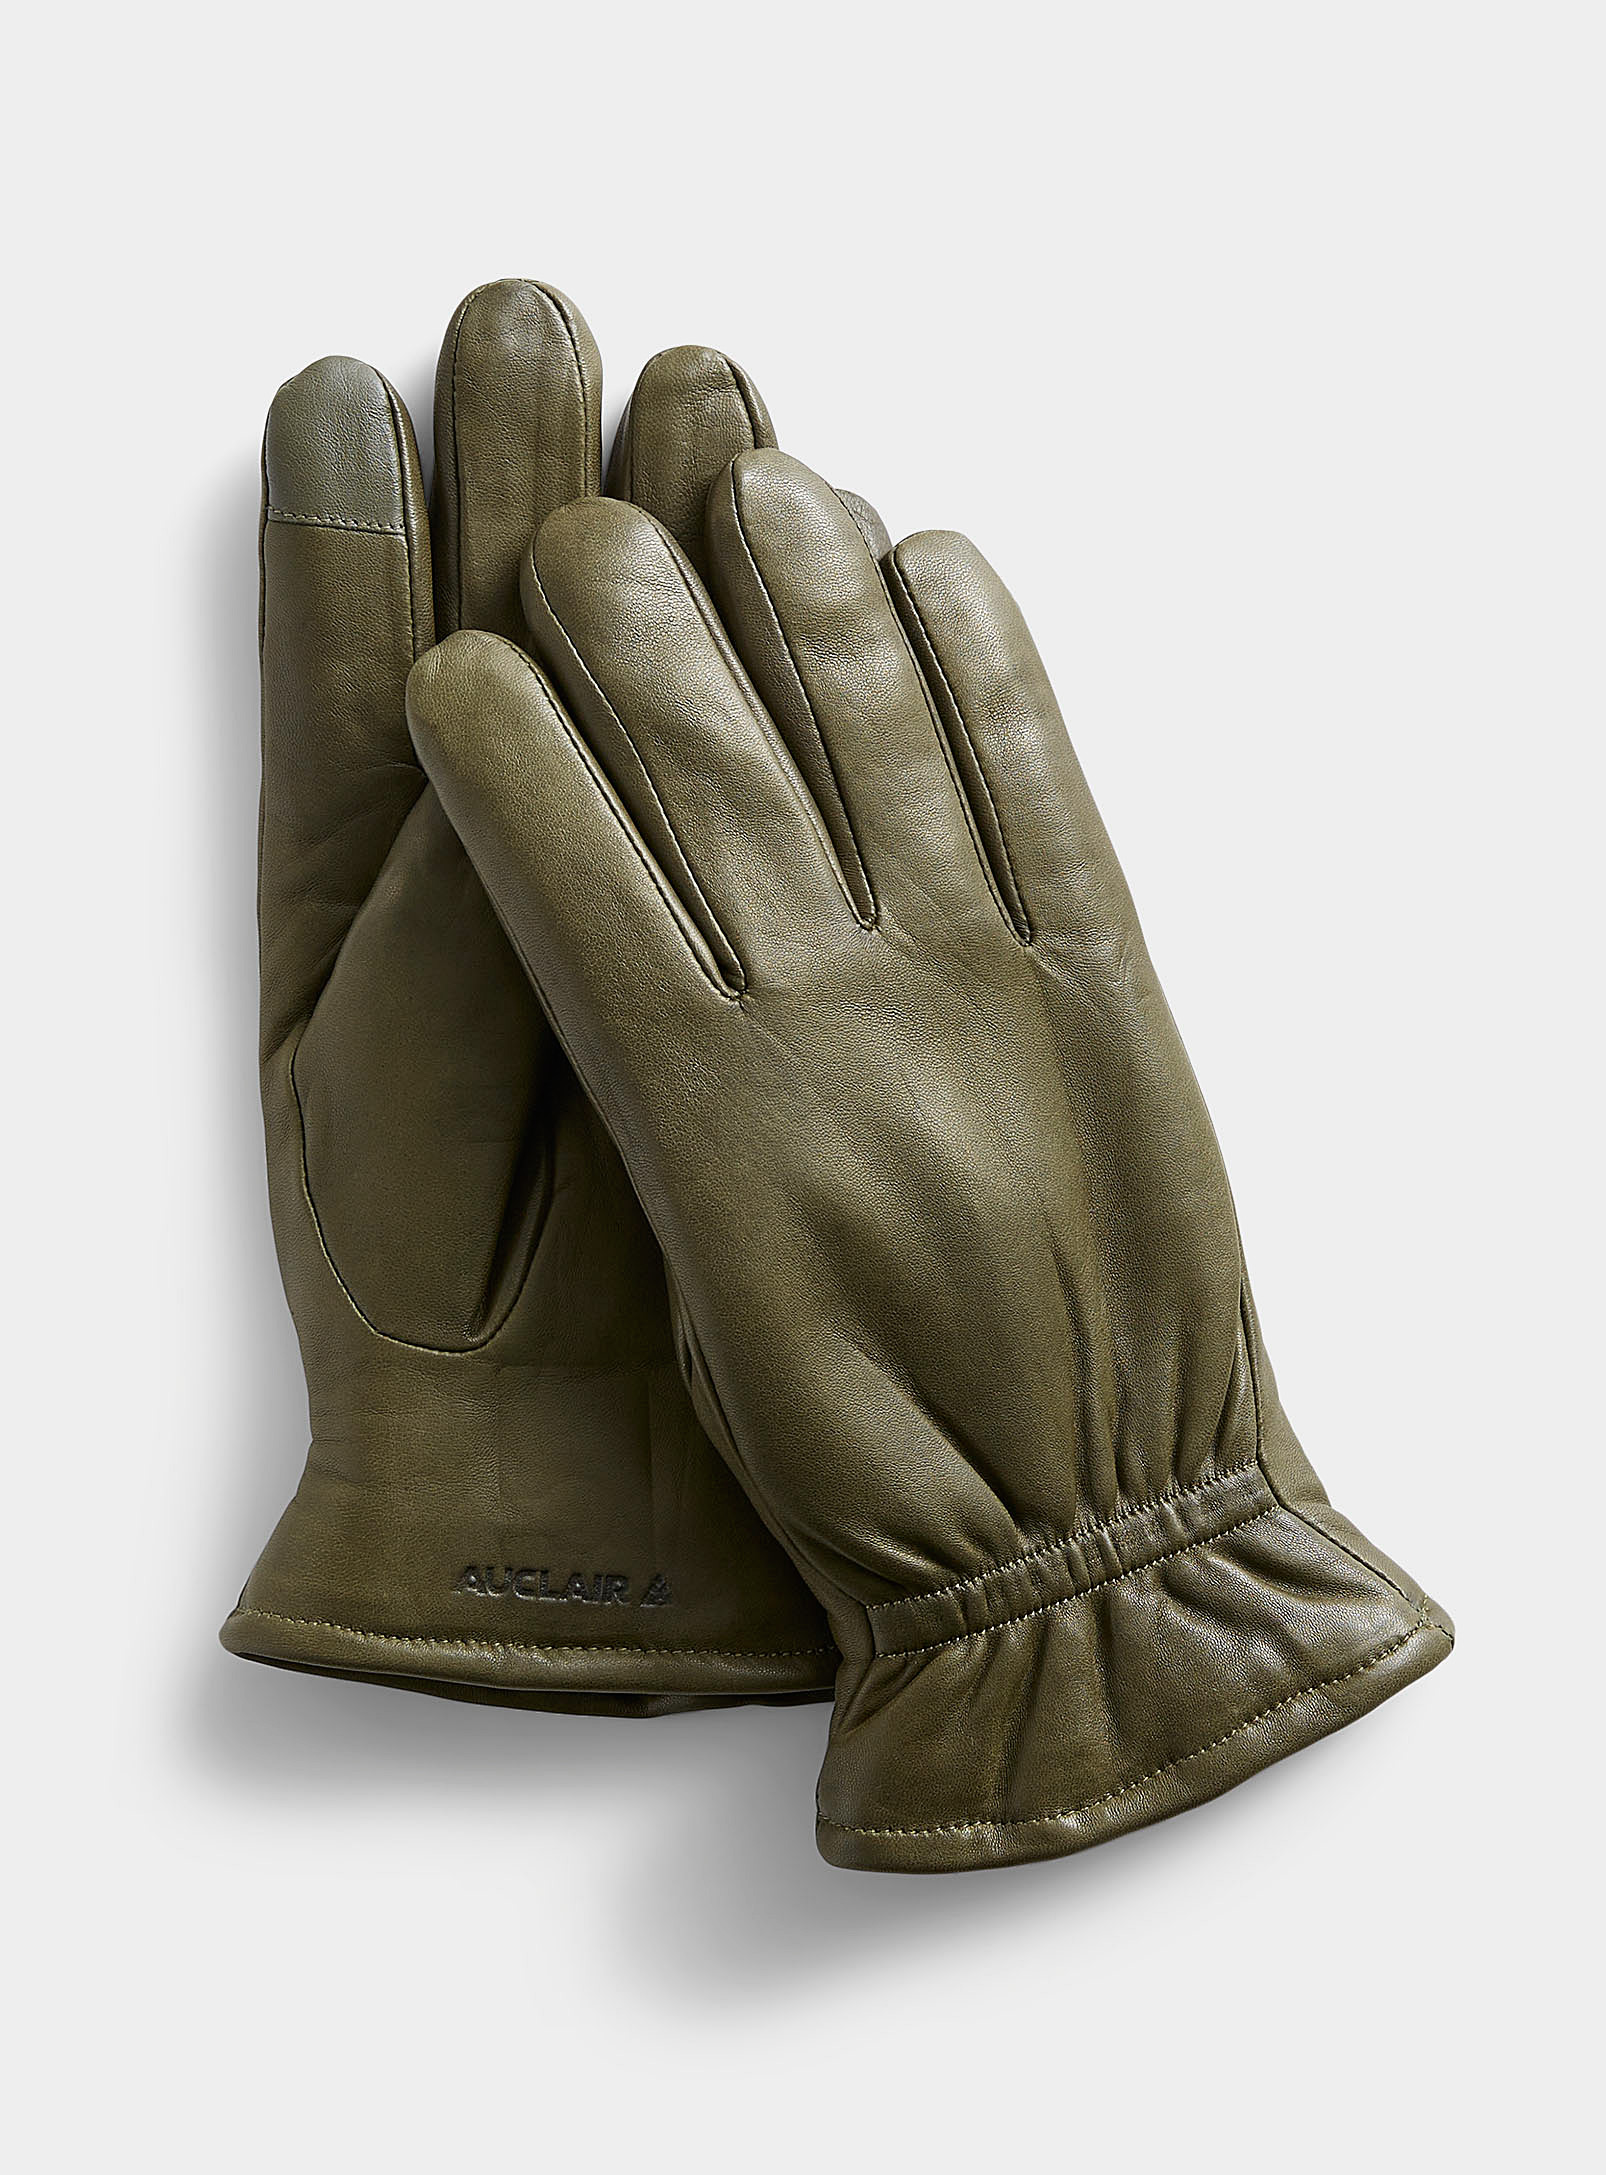 Auclair Demi Lined Leather Gloves In Mossy Green